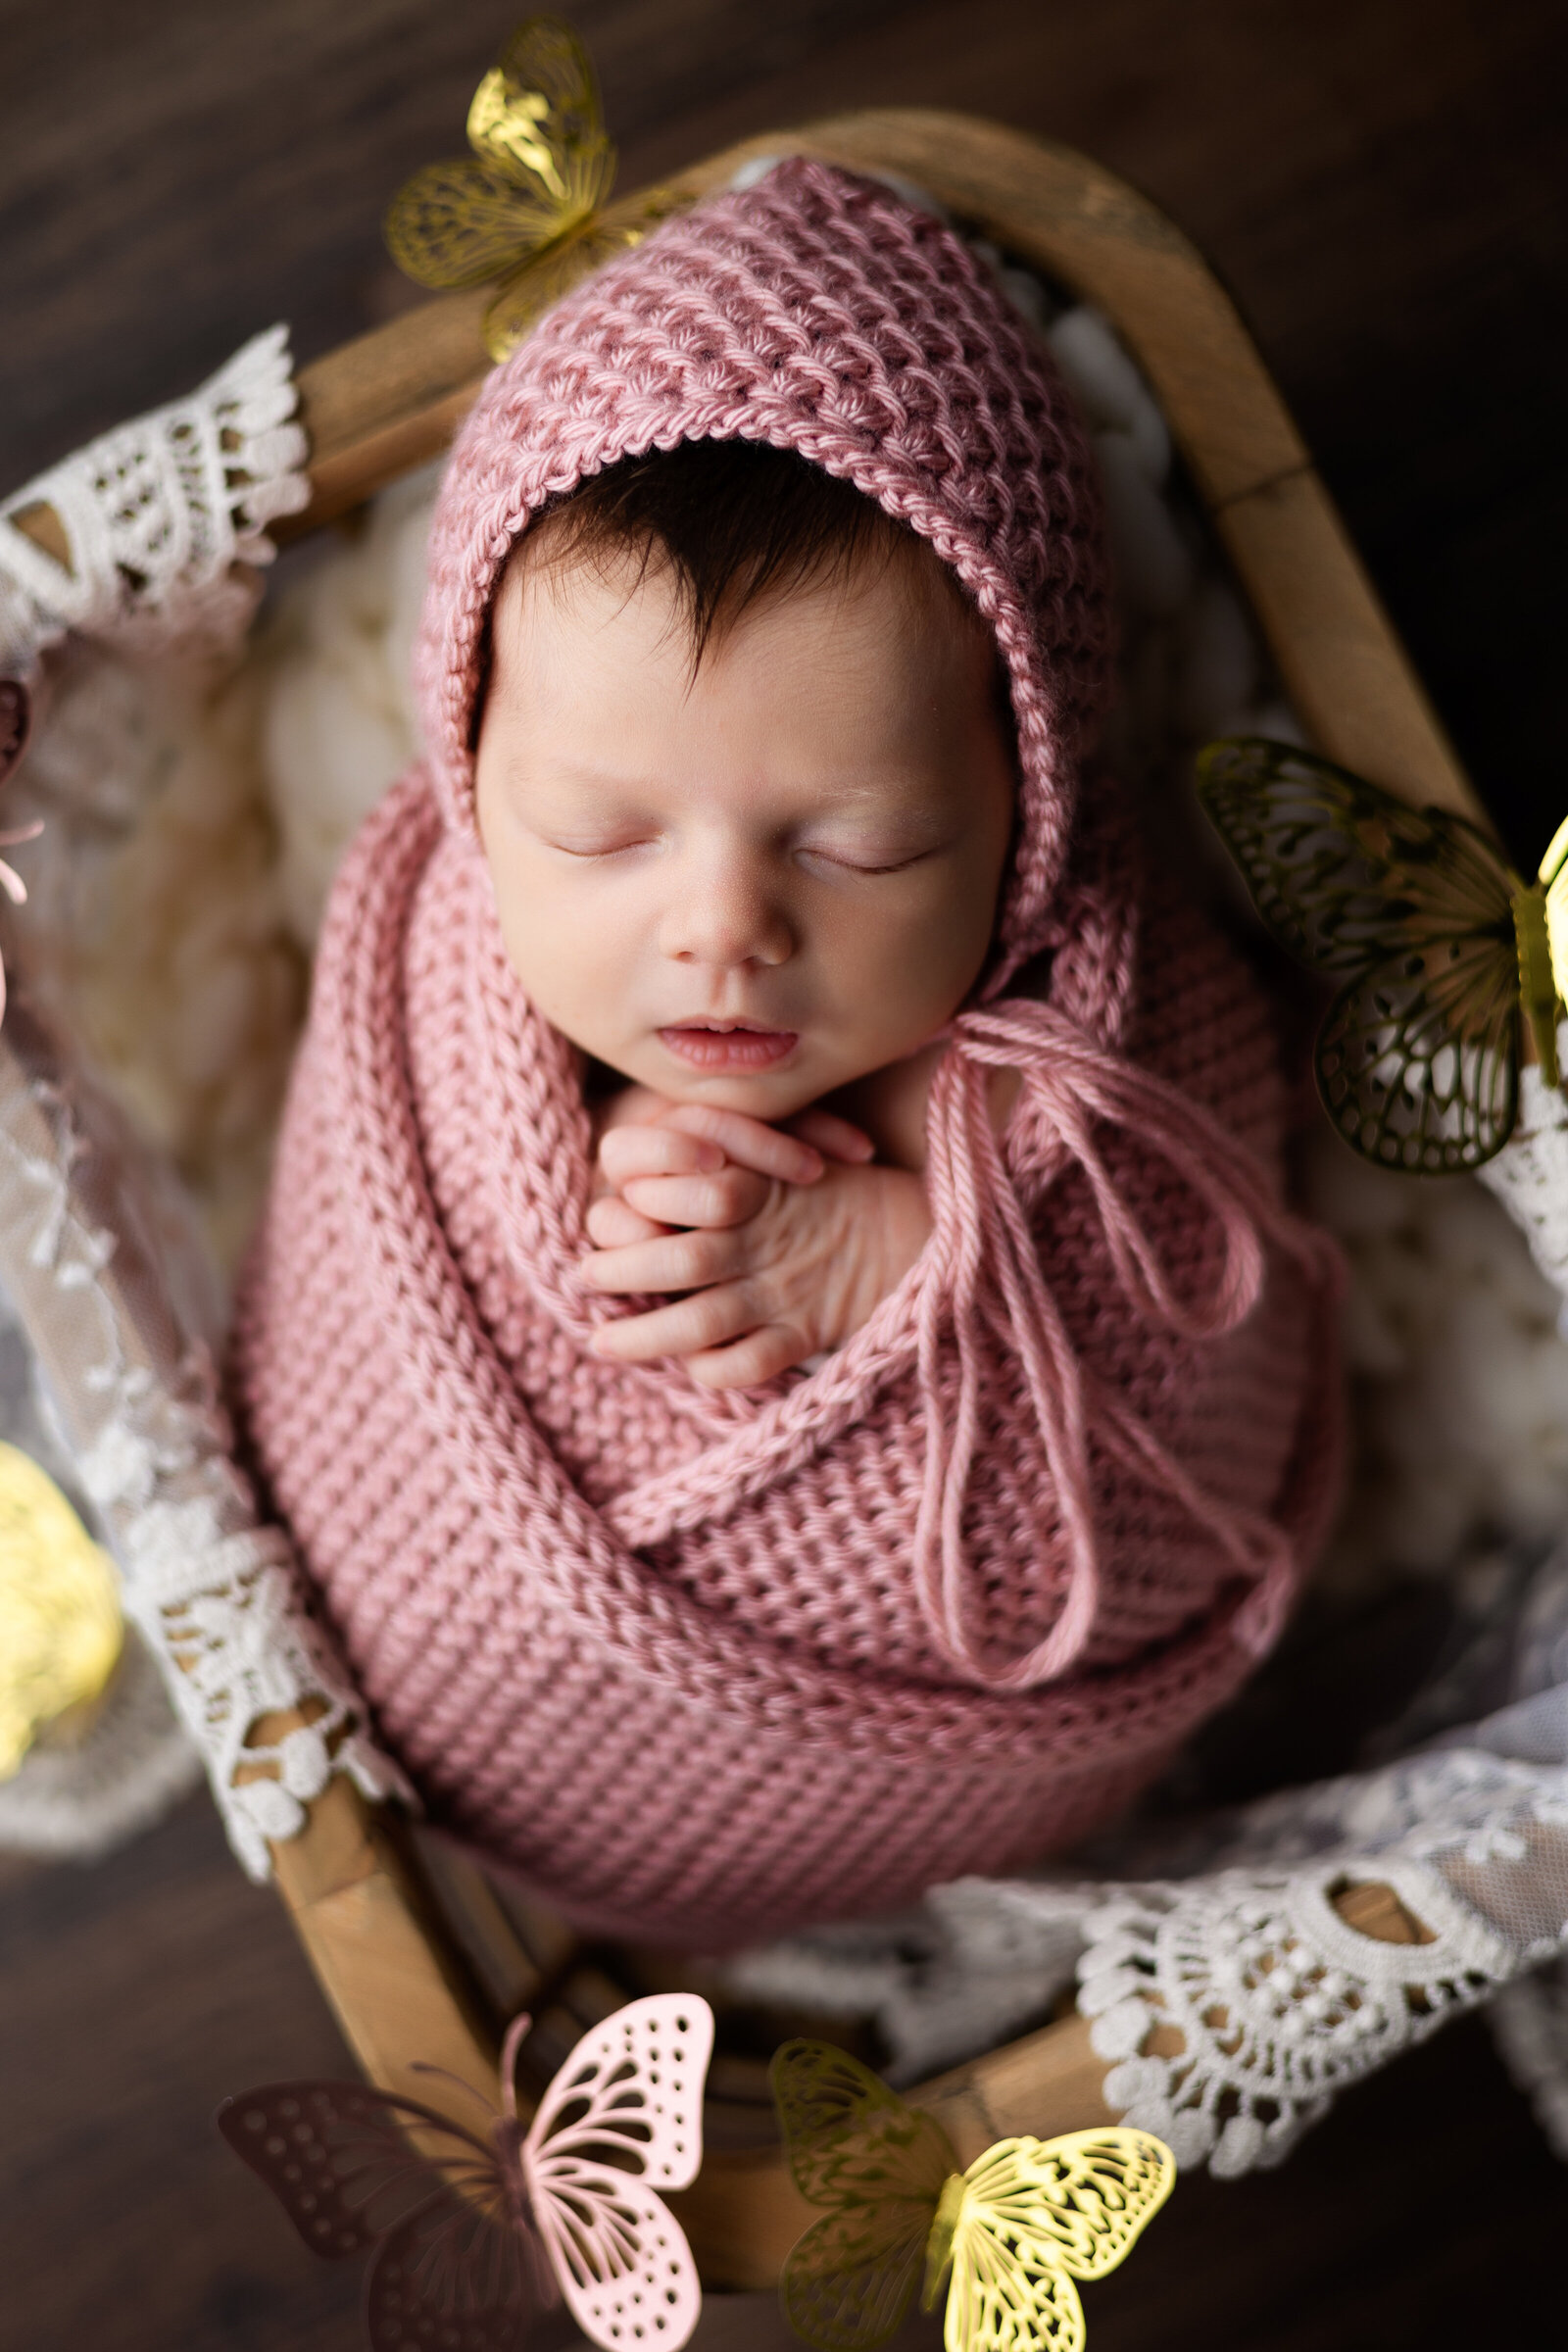 Newborn baby girl swaddled in a pink knit wrap with matching bonnet and posed in a wooden crate surrounded by butterflies